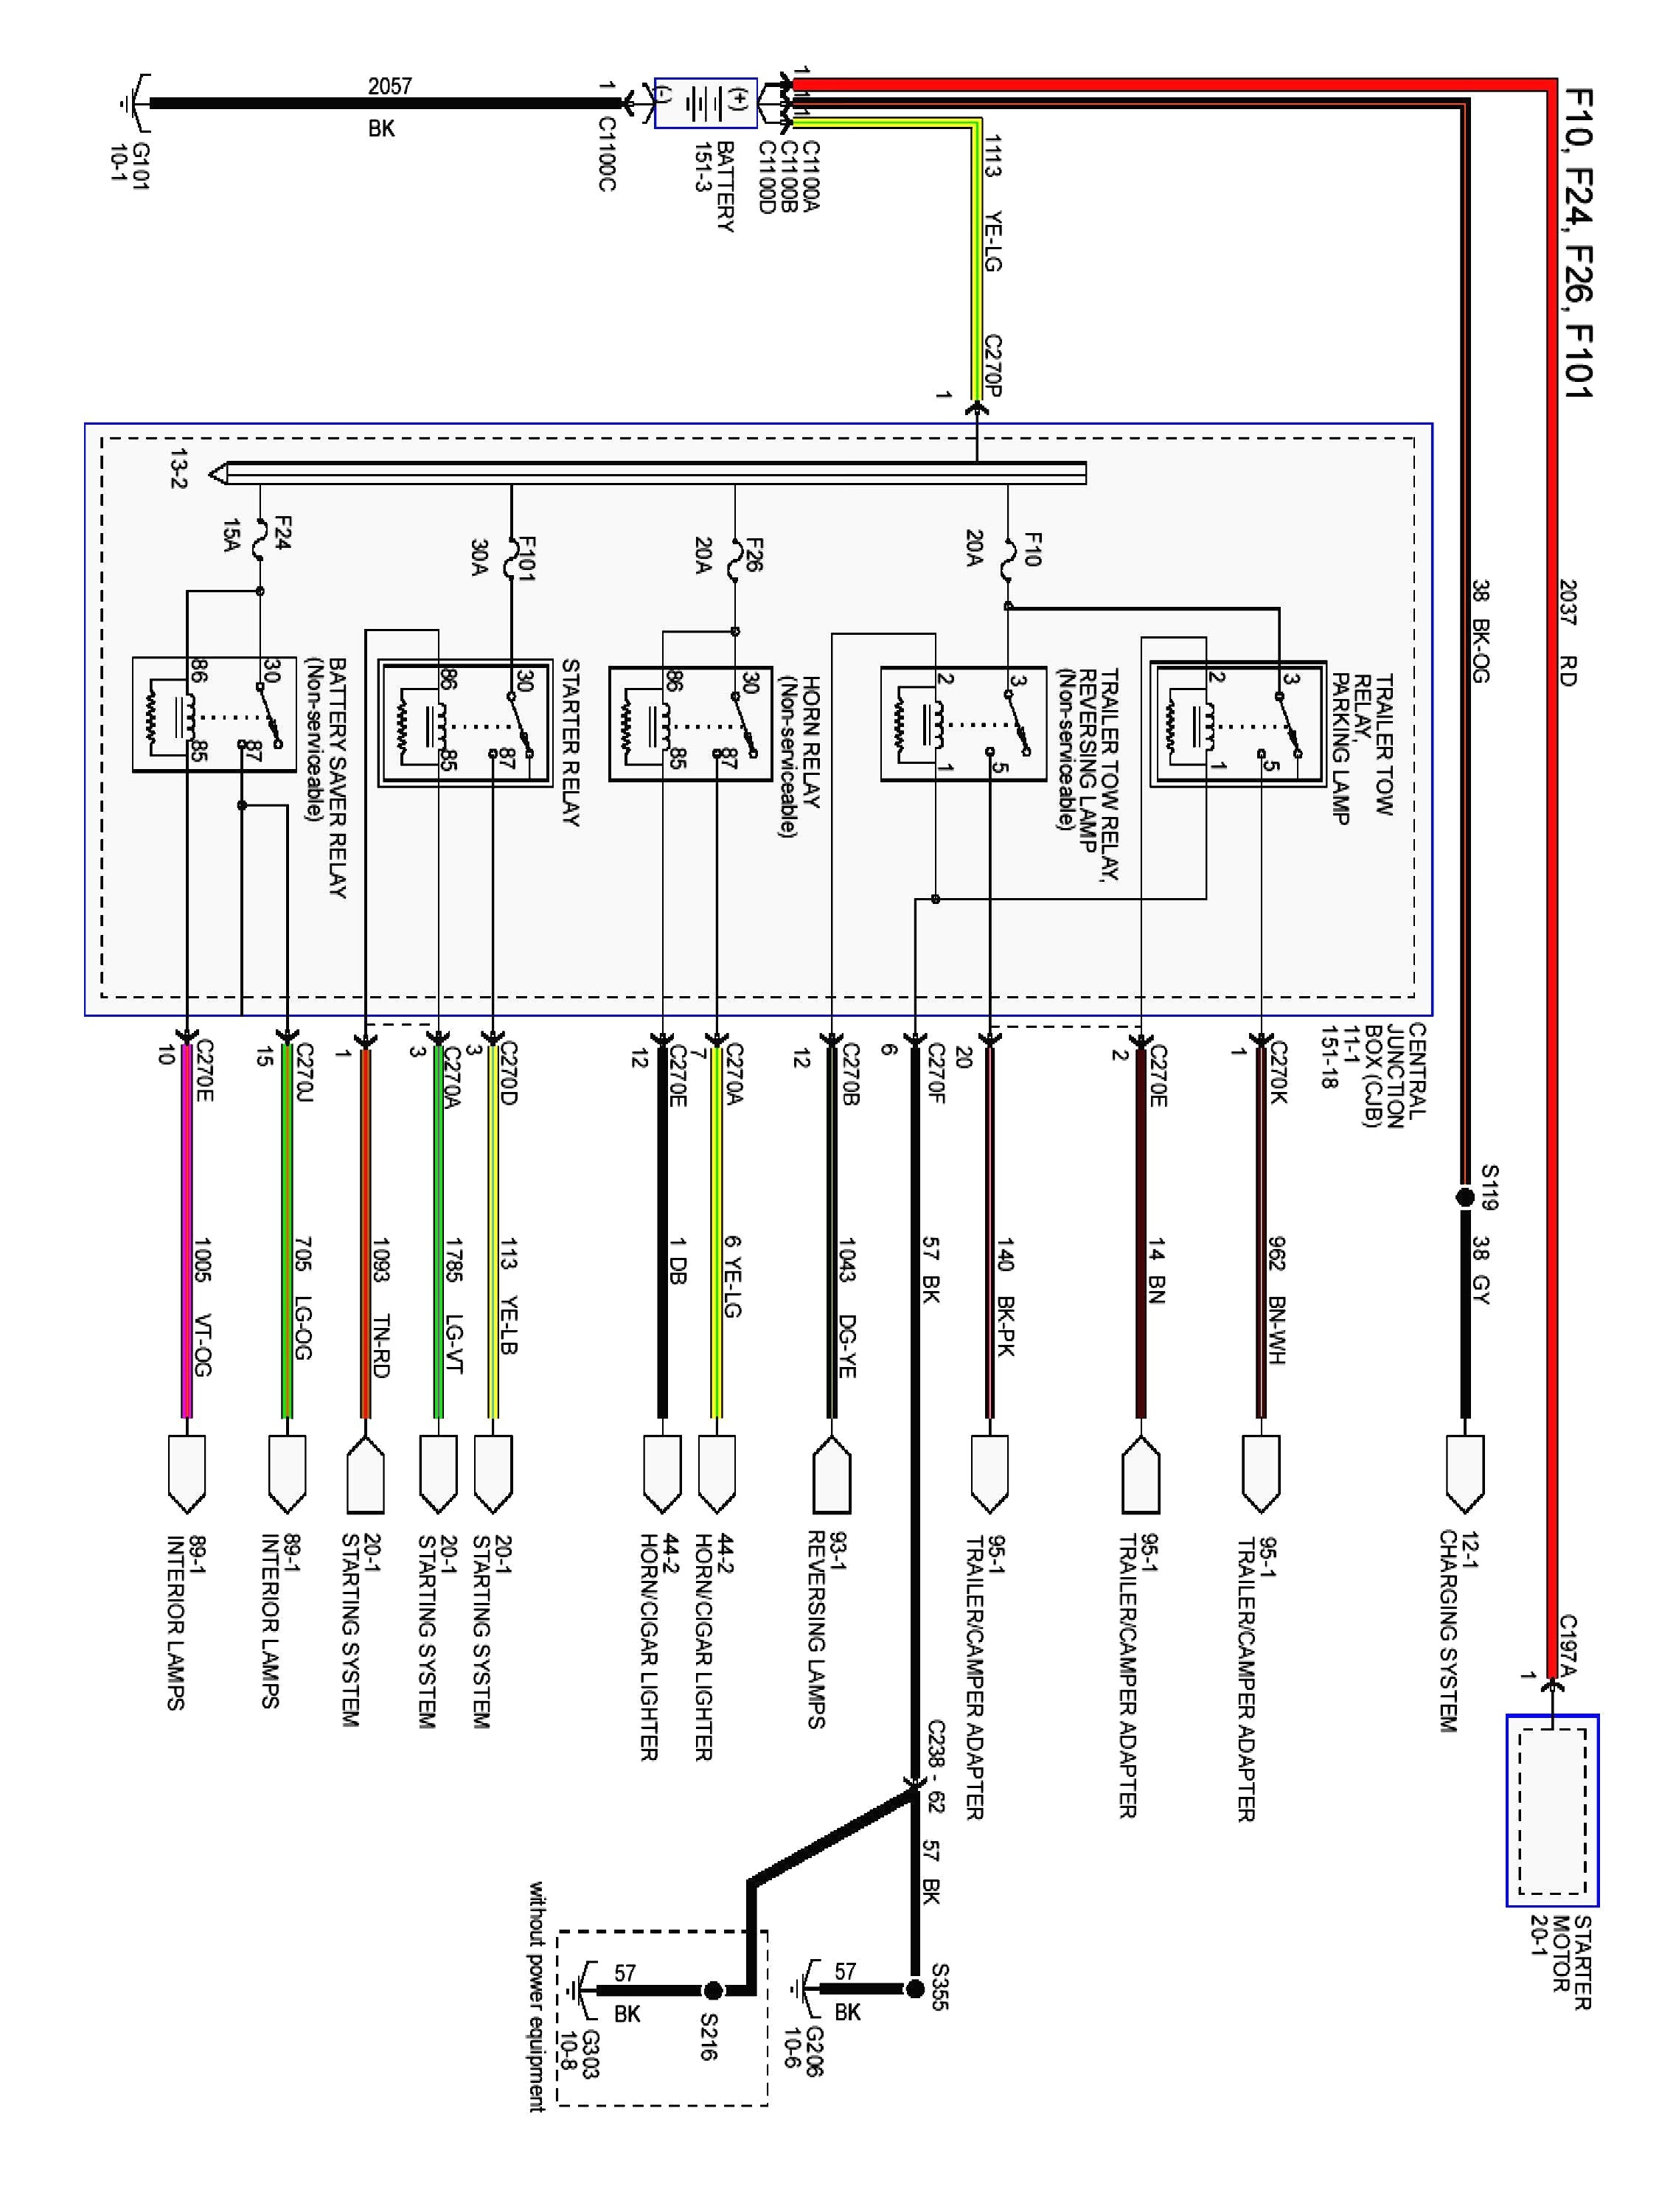 2002 Ford Mustang Stereo Wiring Diagram from detoxicrecenze.com